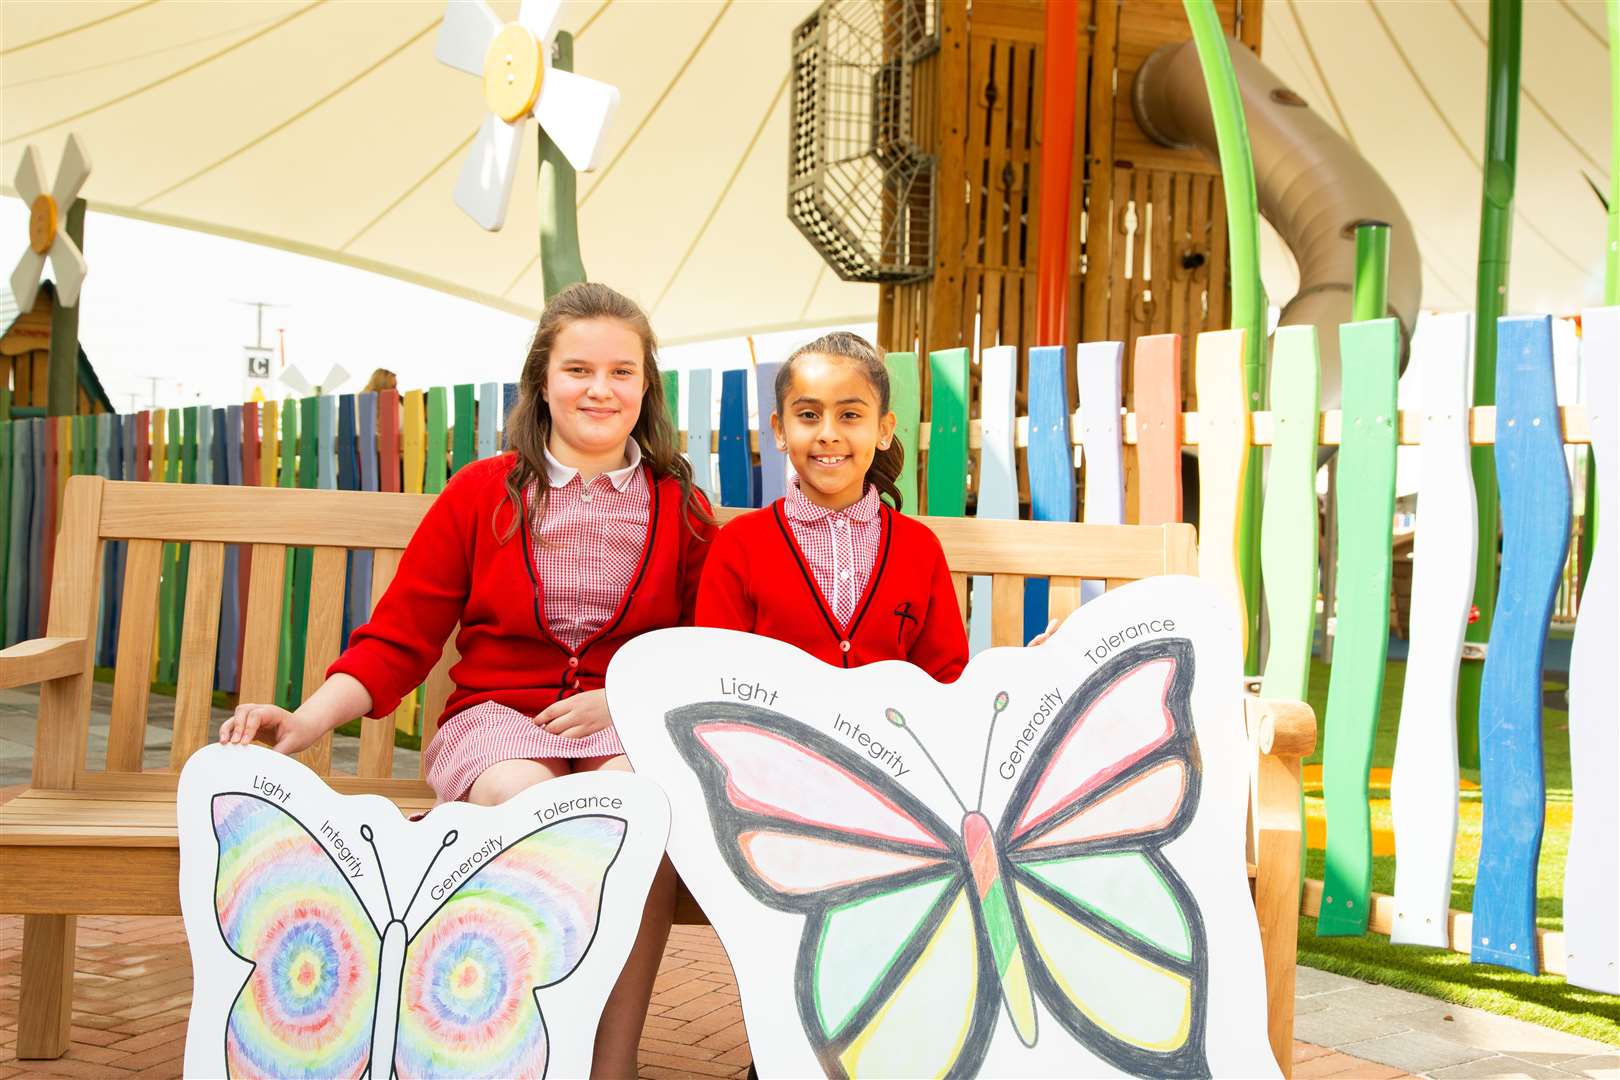 The visit marked the first time students saw their winning butterfly designs come to life